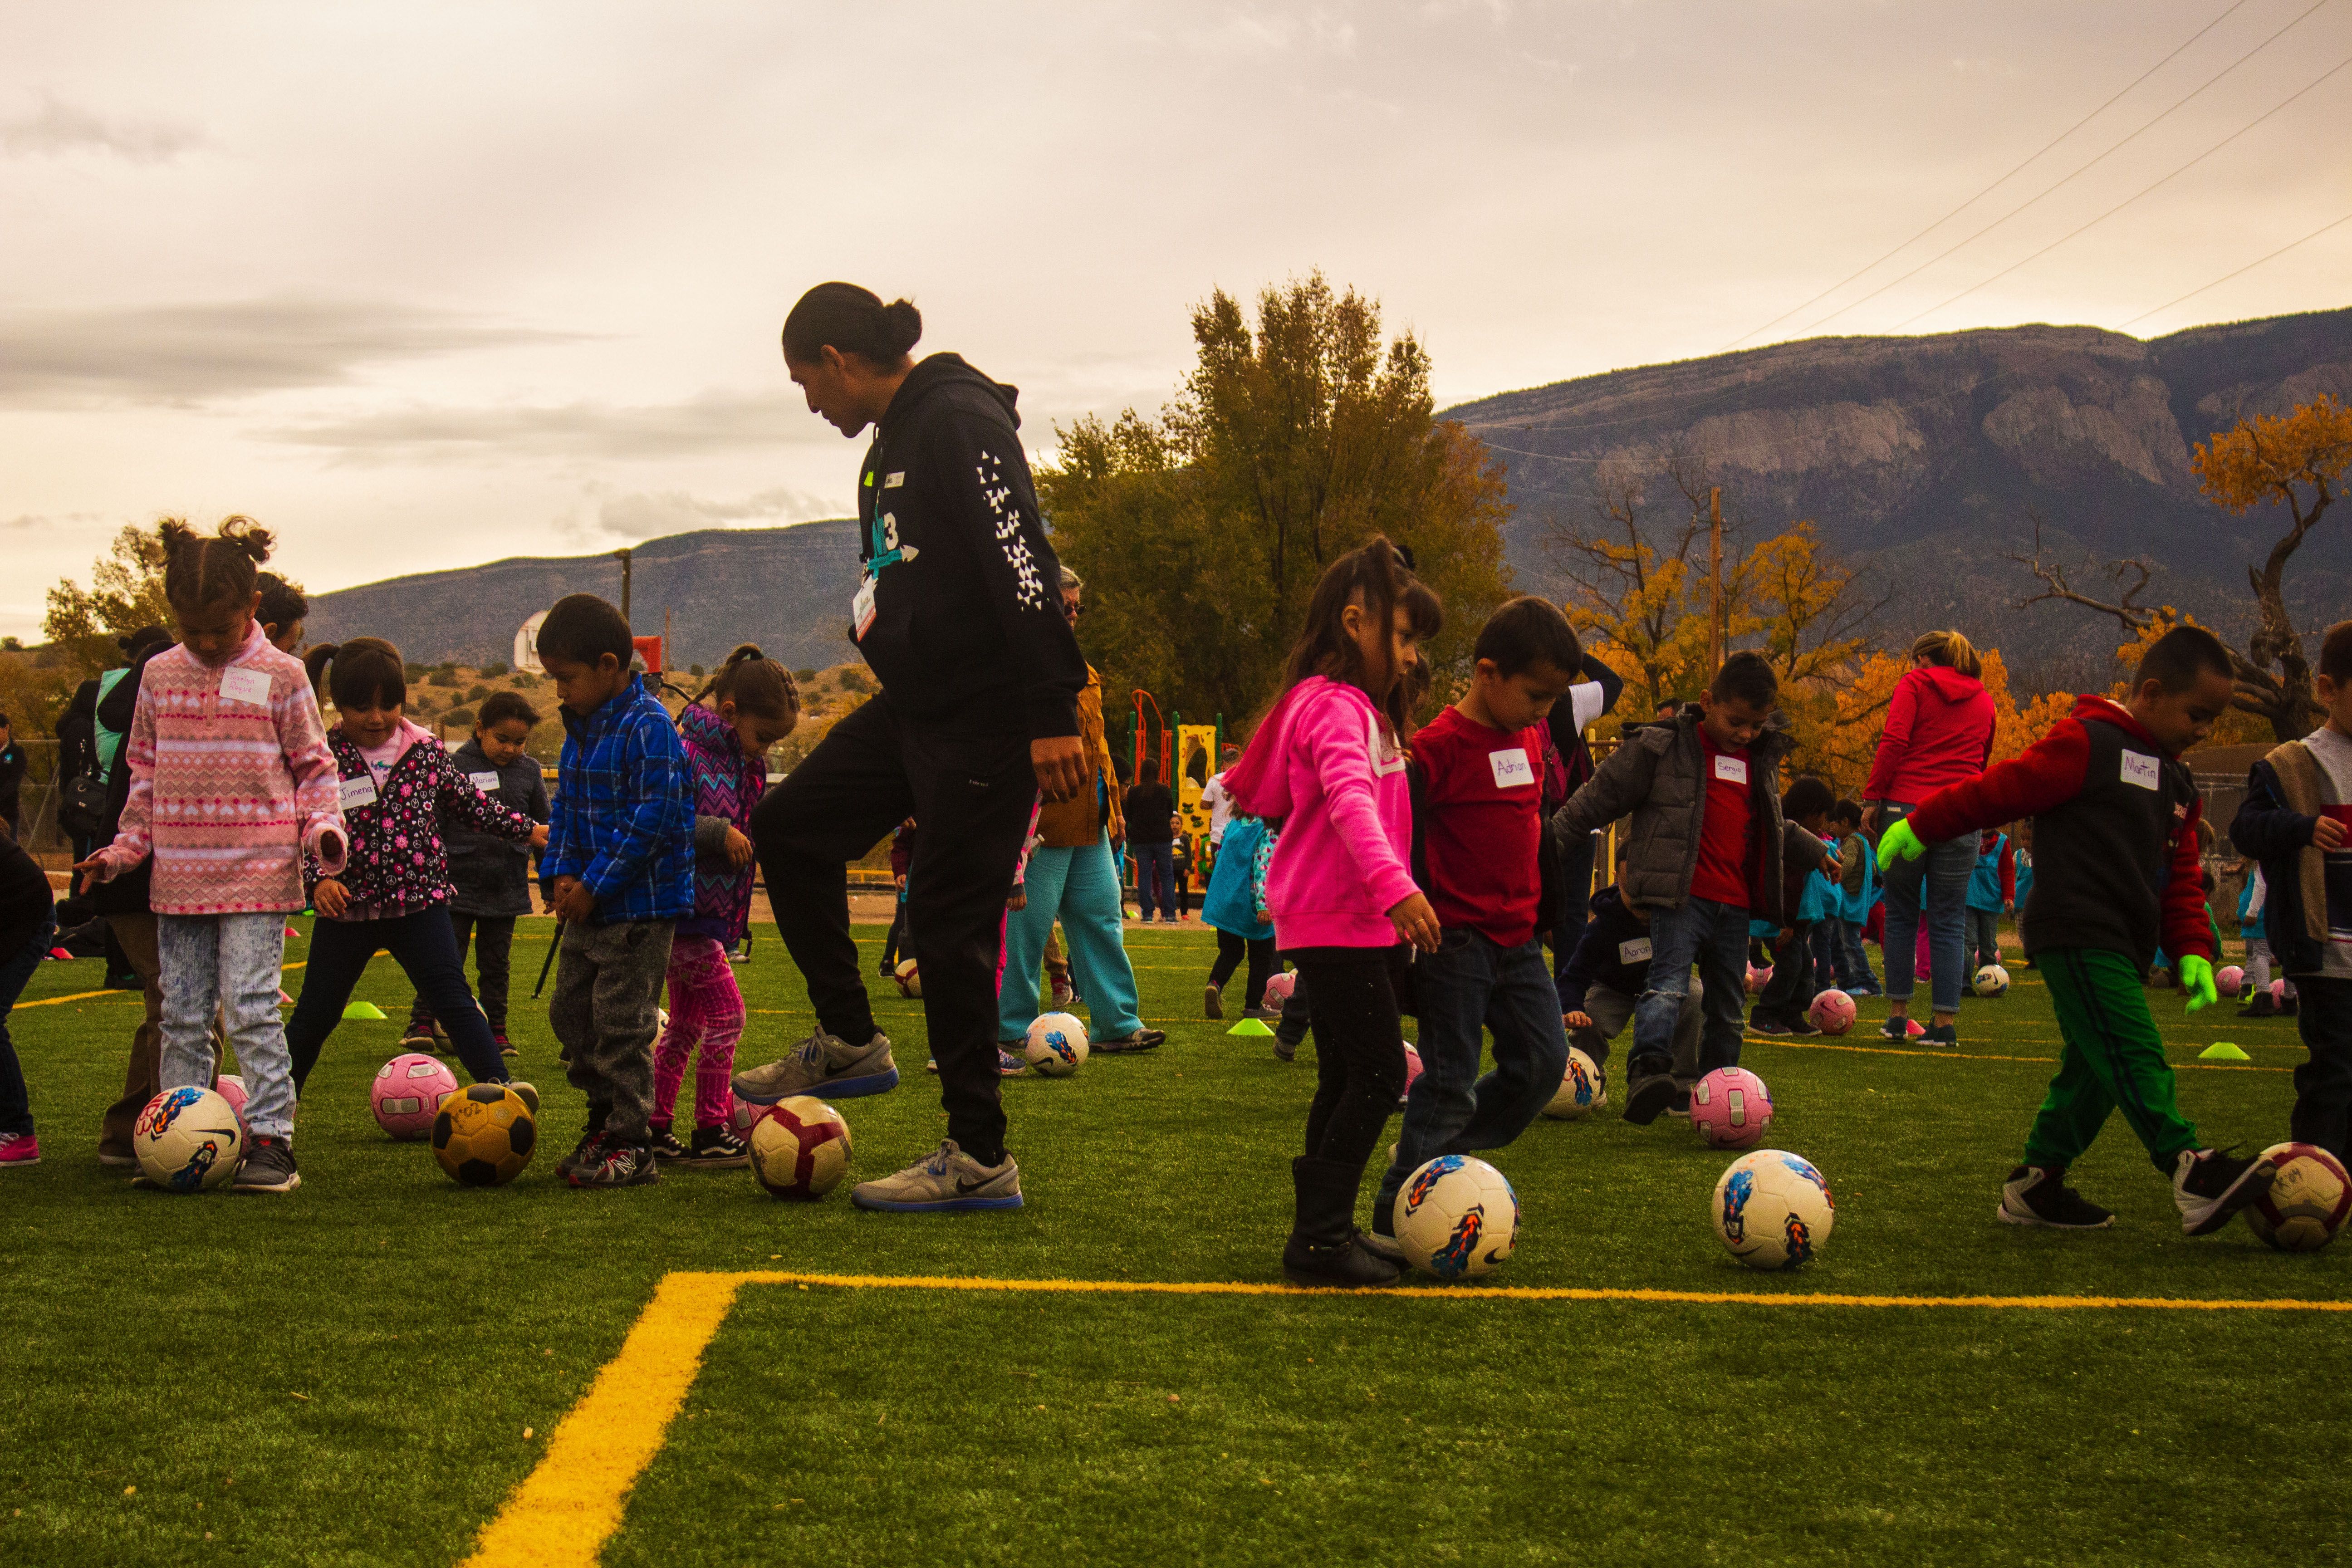 The students warmed up at the beginning of the clinic with basic dribbles. They were instructed to dribble the soccer ball close to their bodies and maintain control. Image by Viridiana Vidales Coyt, United States, 2017.